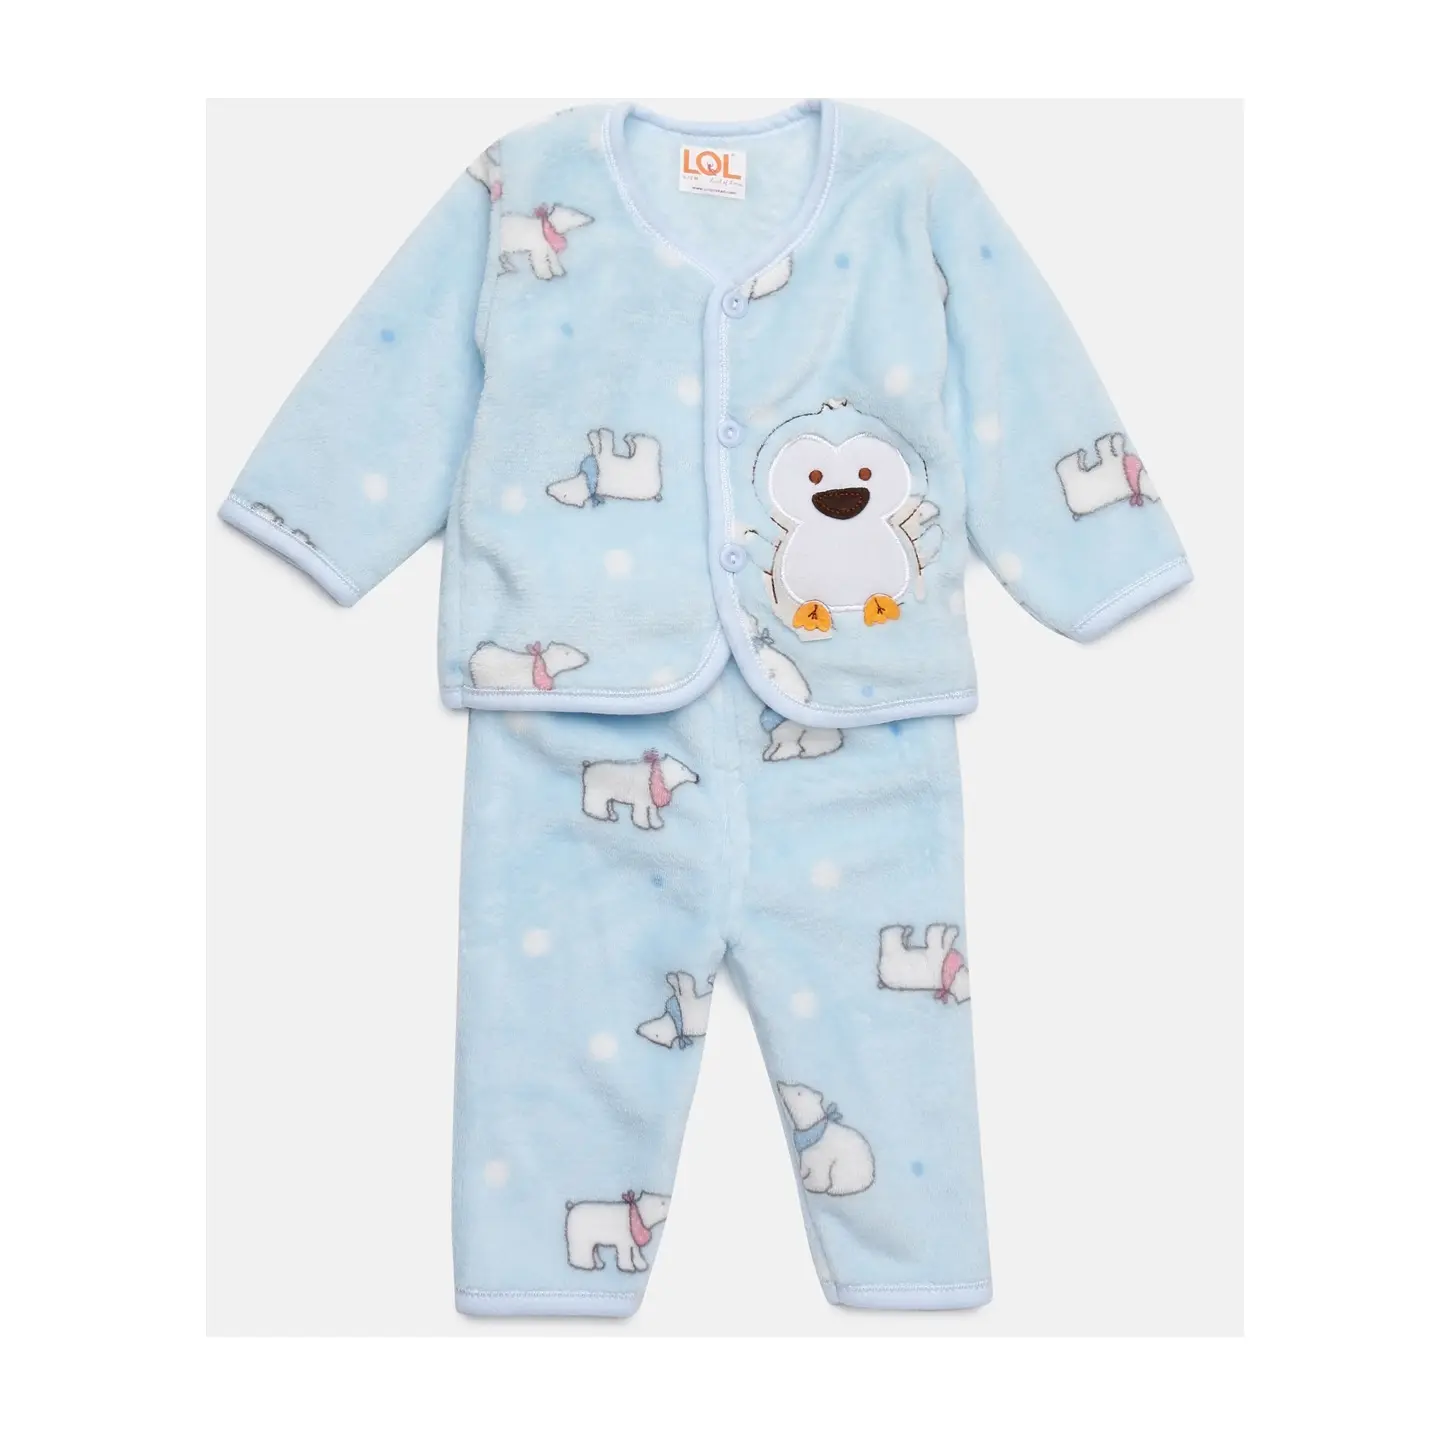 Best Quality Newborn Baby Pajamas Sets Knitted Cotton Tops Boys Girls Outfits 2 Pieces Baby Clothing at Wholesale Price